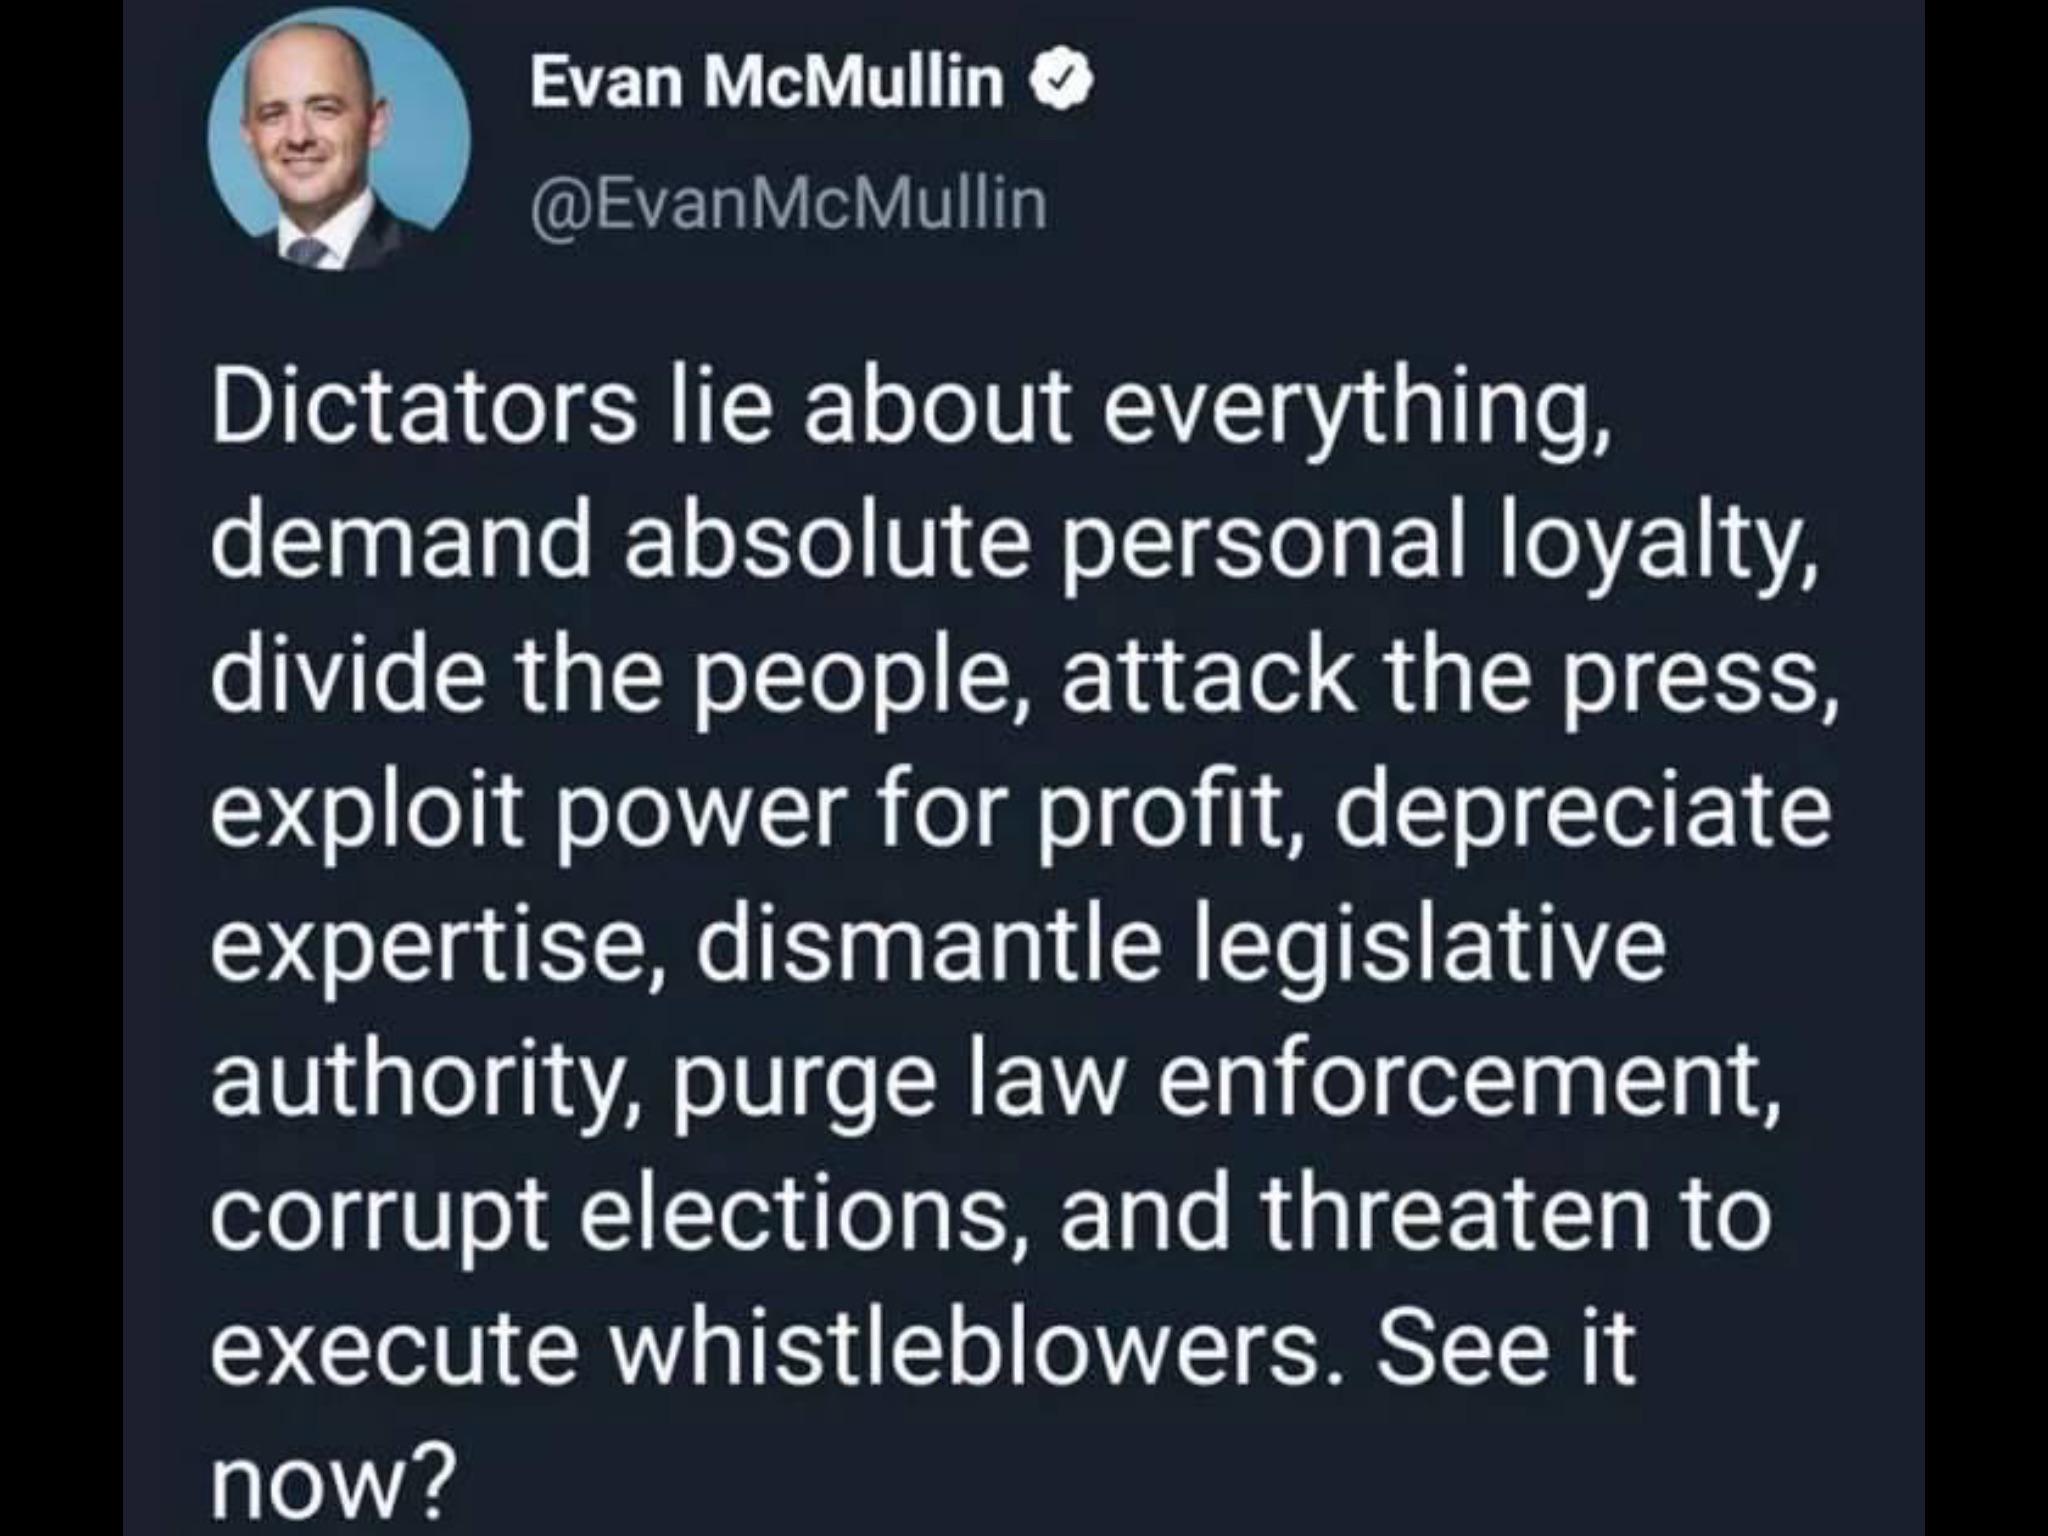 political political-memes political text: Evan McMullin e @EvanMcMullin Dictators lie about everything, demand absolute personal loyalty, divide the people, attack the press, exploit power for profit, depreciate expertise, dismantle legislative authority, purge law enforcement, corrupt elections, and threaten to execute whistleblowers. See it 